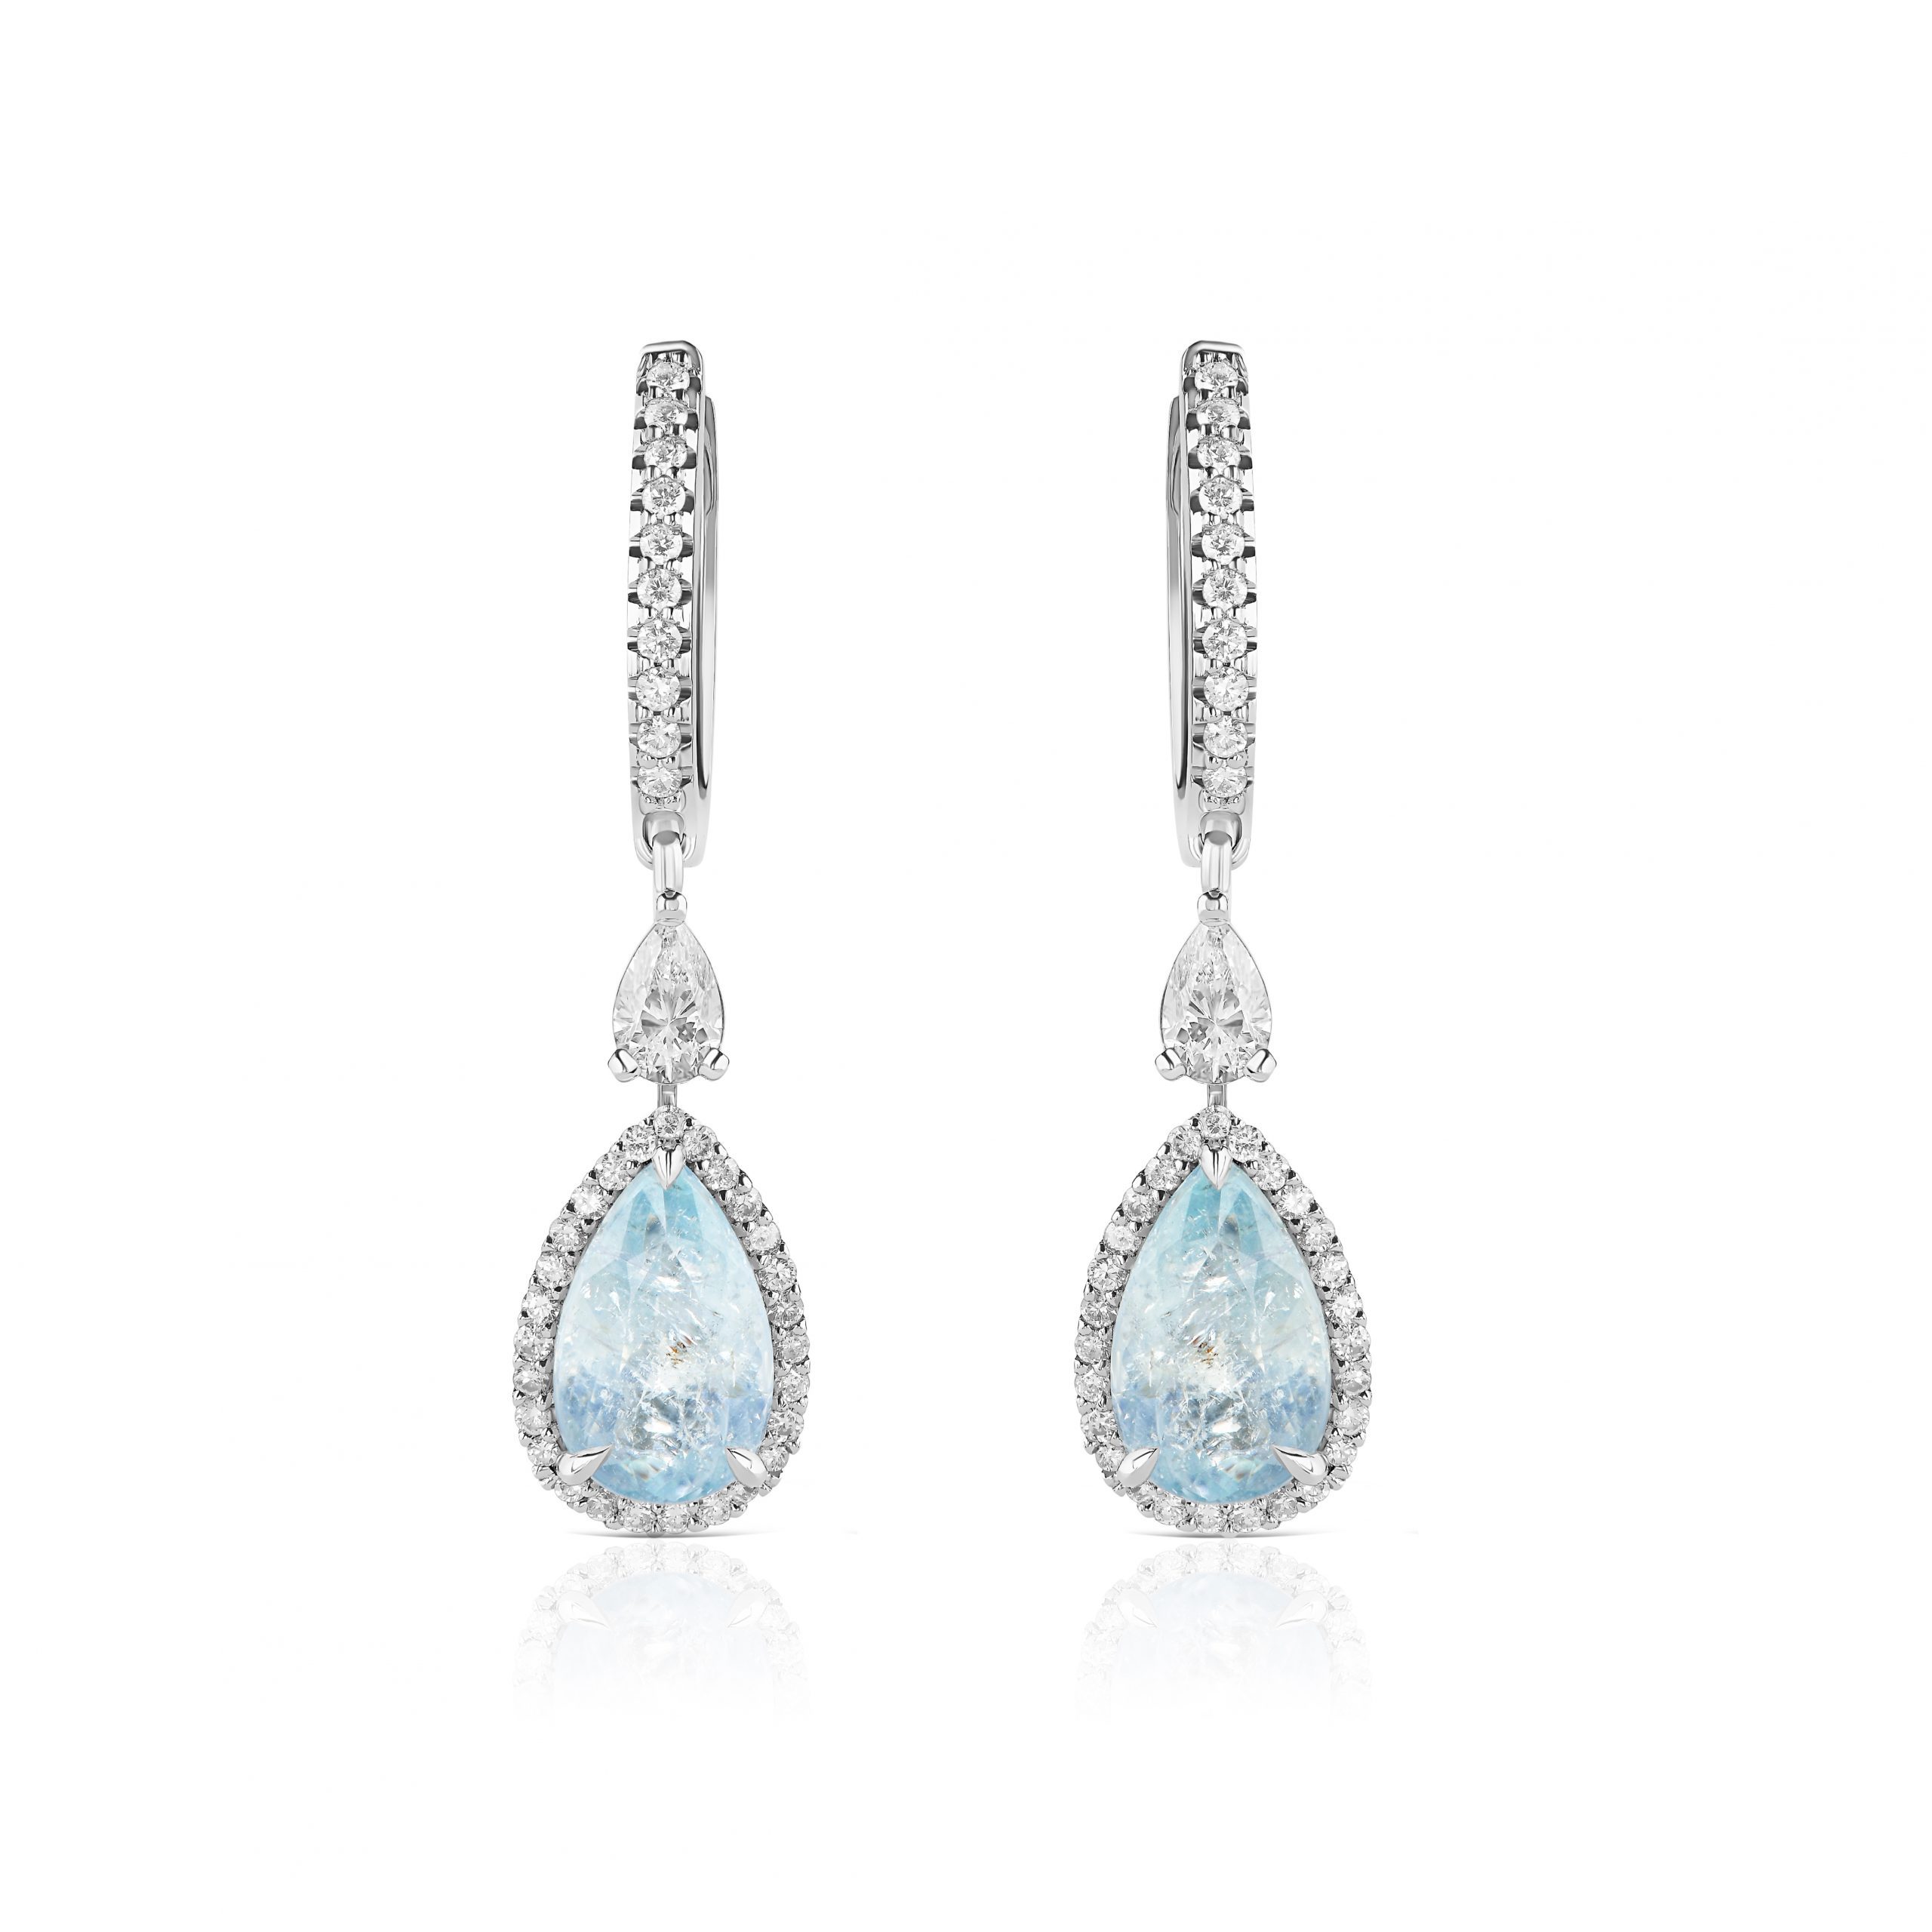 Paraiba tourmaline earrings with a total weight of 4 ct #1